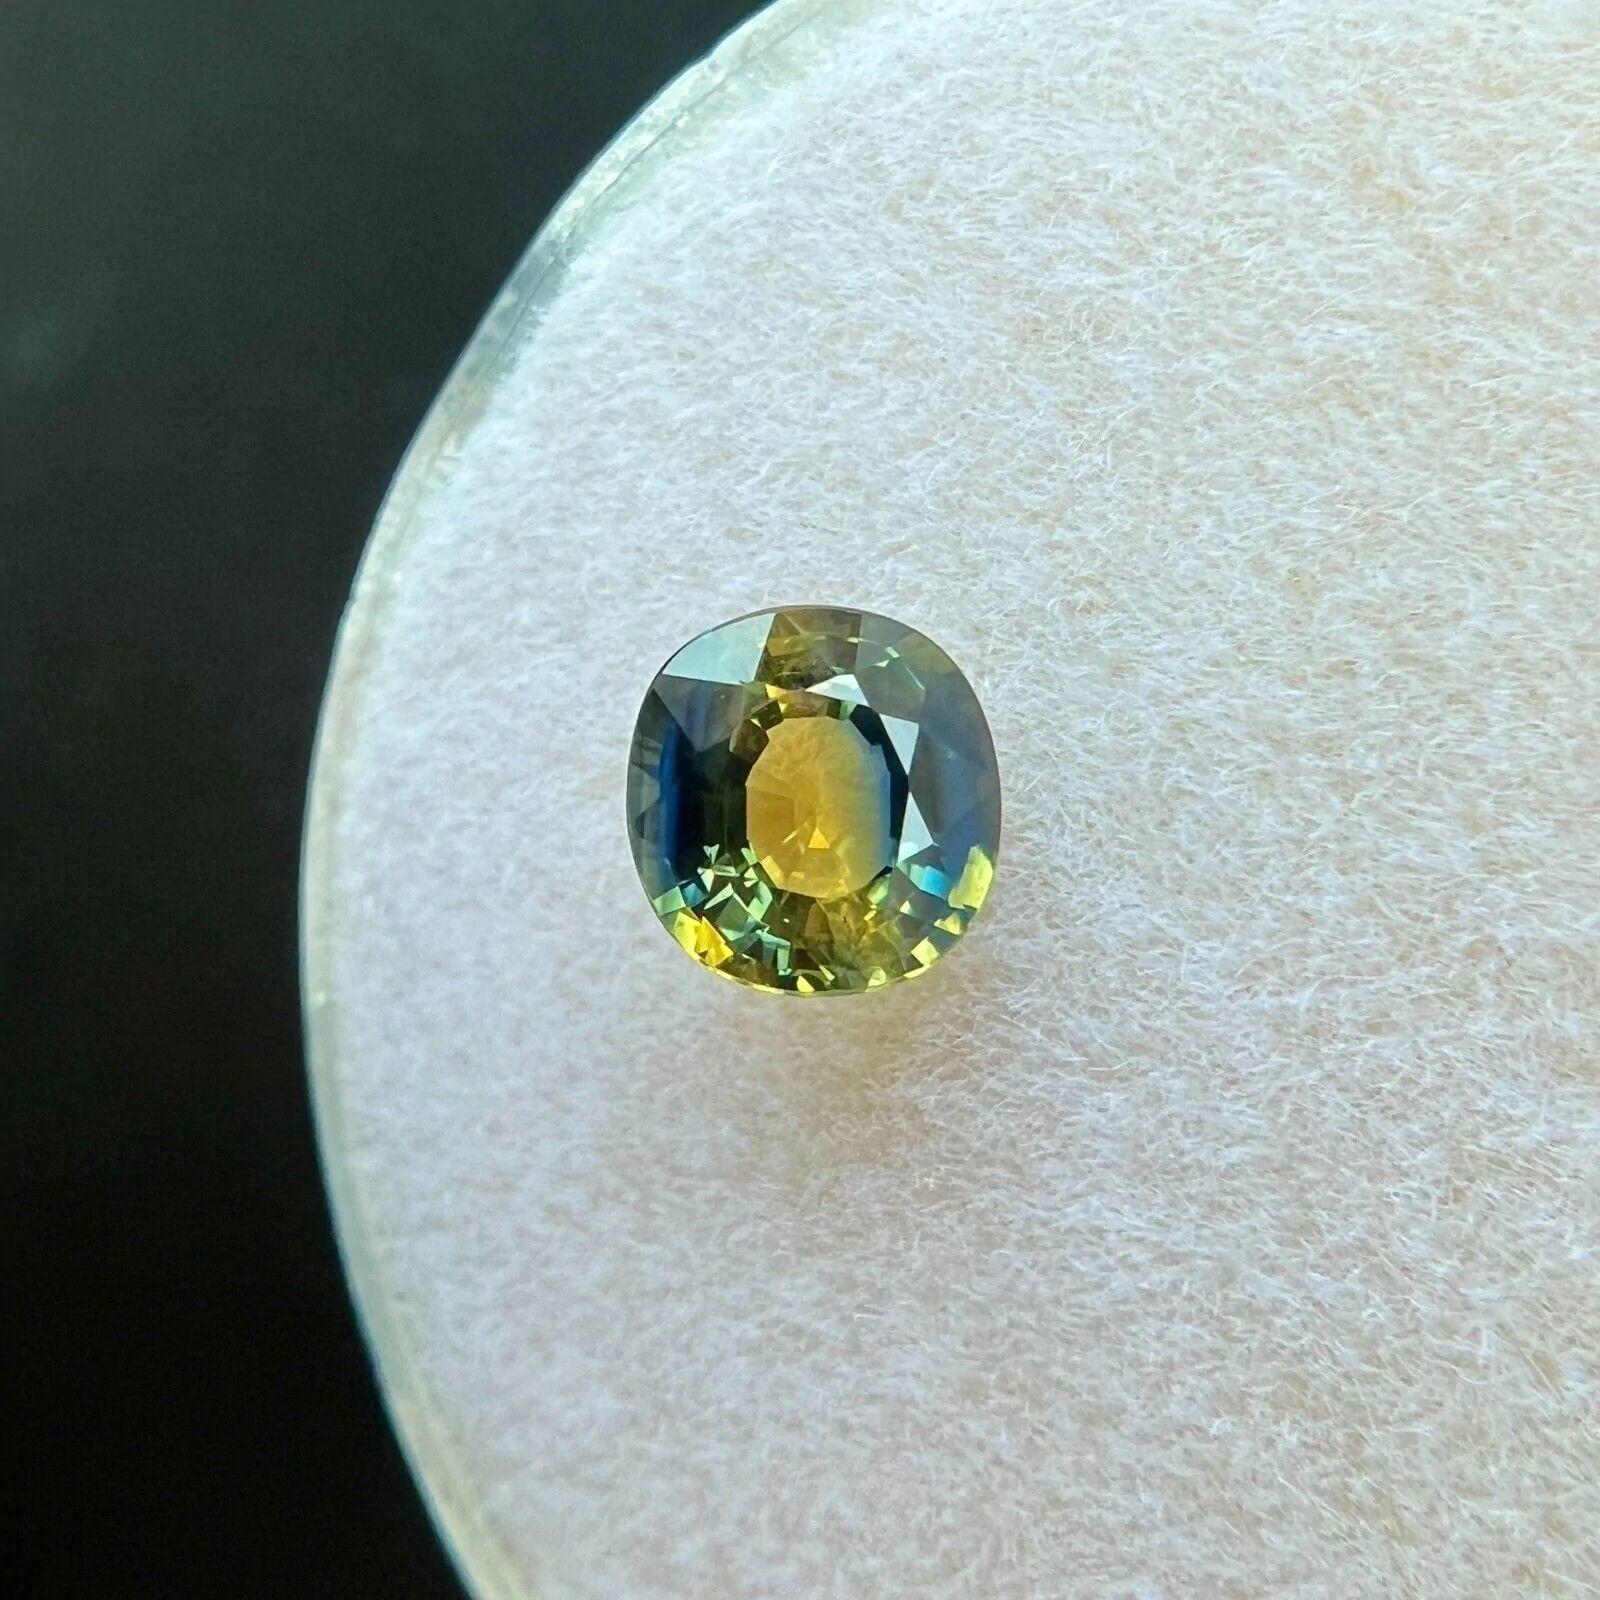 Unqiue Rare Bi Colour Sapphire 0.62ct Blue Yellow Orange Oval Cut 5x4.7mm

Natural Blue Yellow Orange Bi Colour Sapphire Gemstone.
0.62 Carat with a beautiful and unique bi colour effect and excellent clarity.
Also has an excellent oval cut and